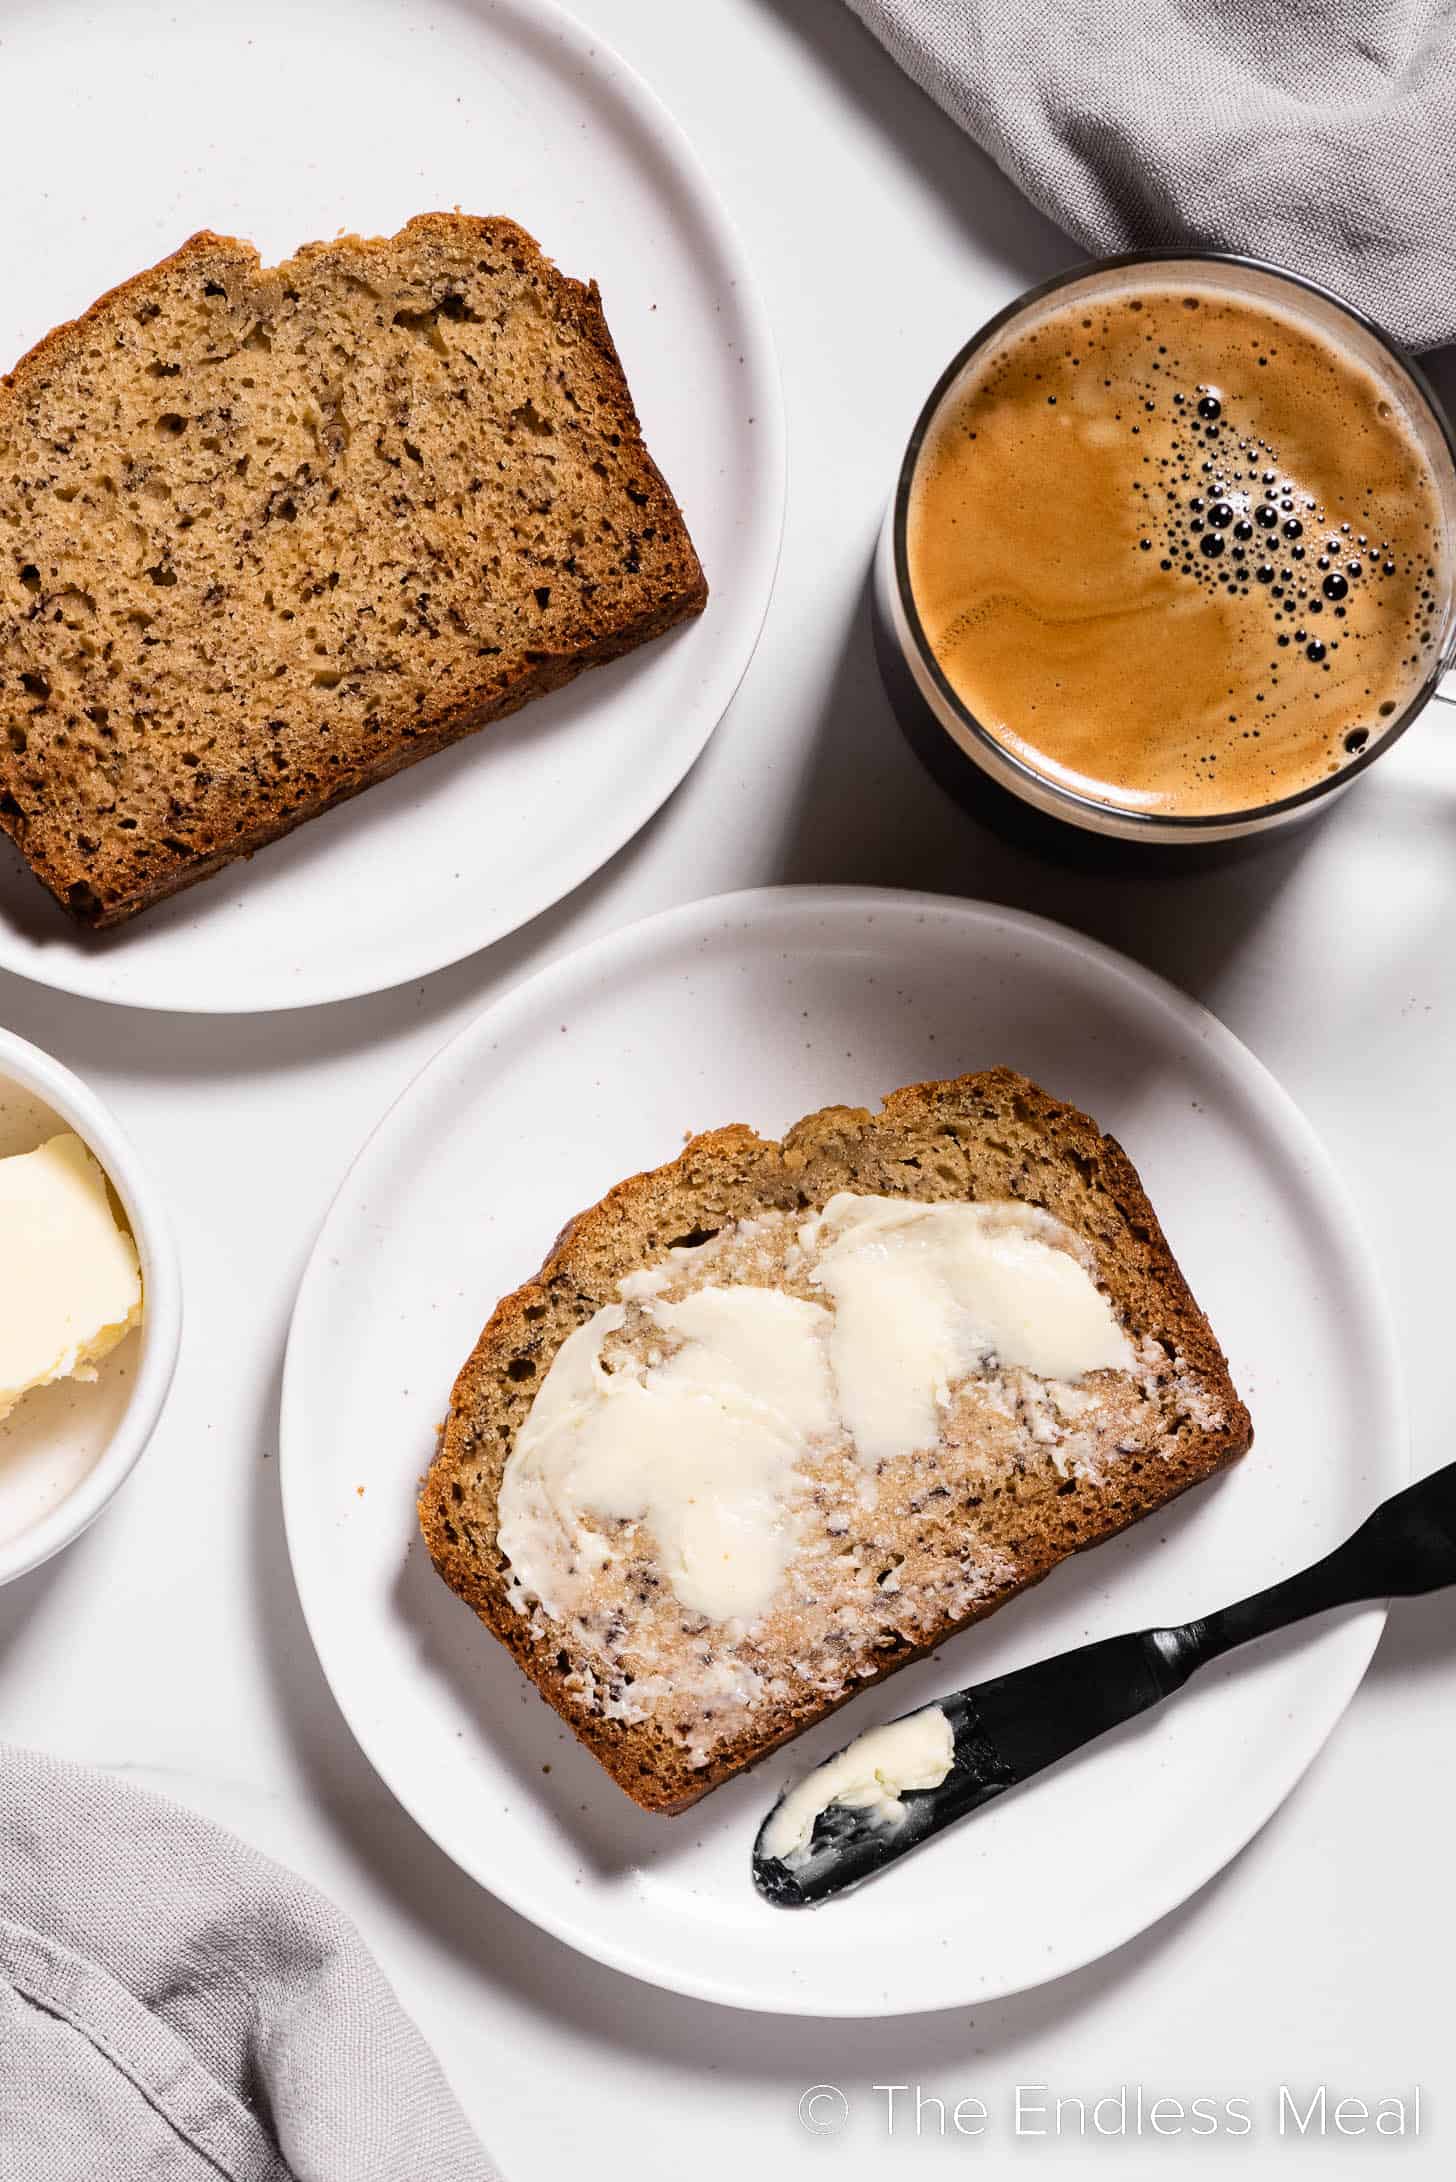 A buttered slice of banana bread made with buttermilk on a plate.